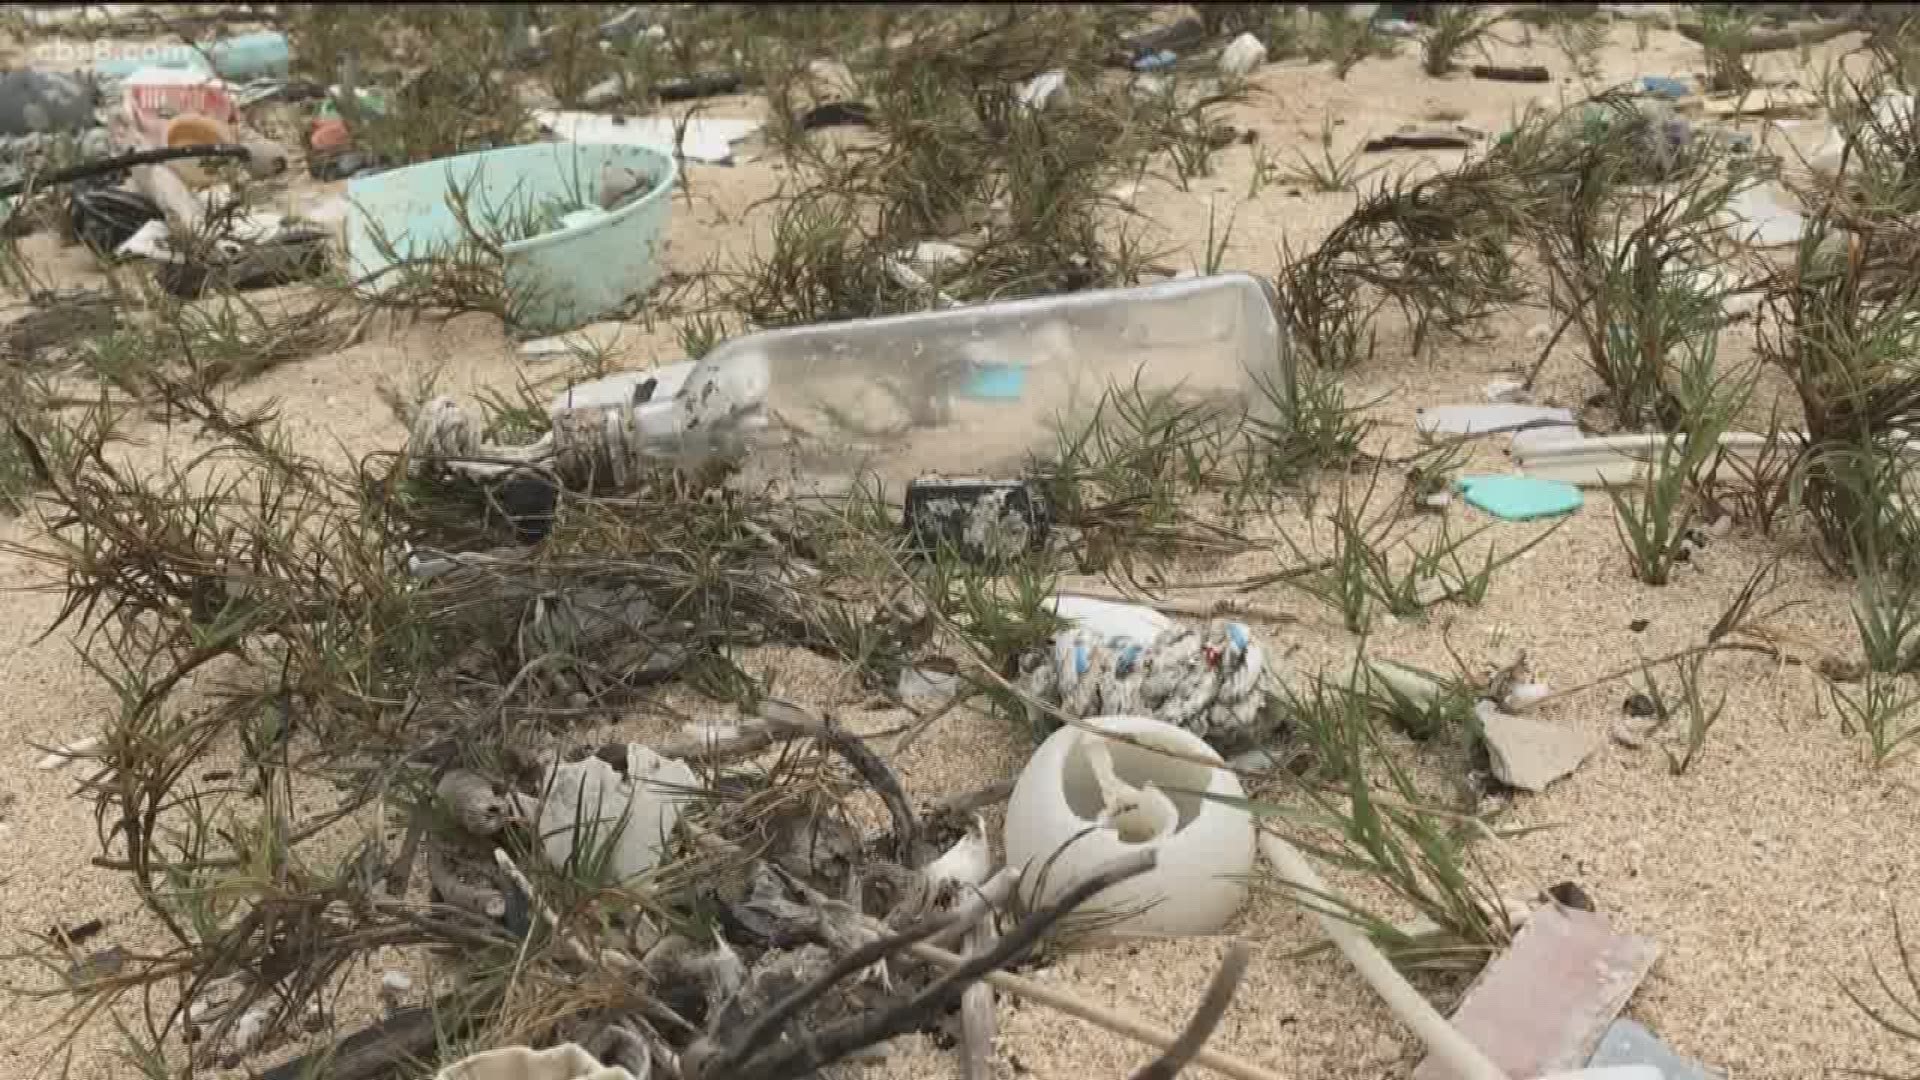 Plastic can last for centuries and it's being produced at an alarming rate. The images of trash washed up on once-gorgeous beaches are a heartbreaking sign of the times.